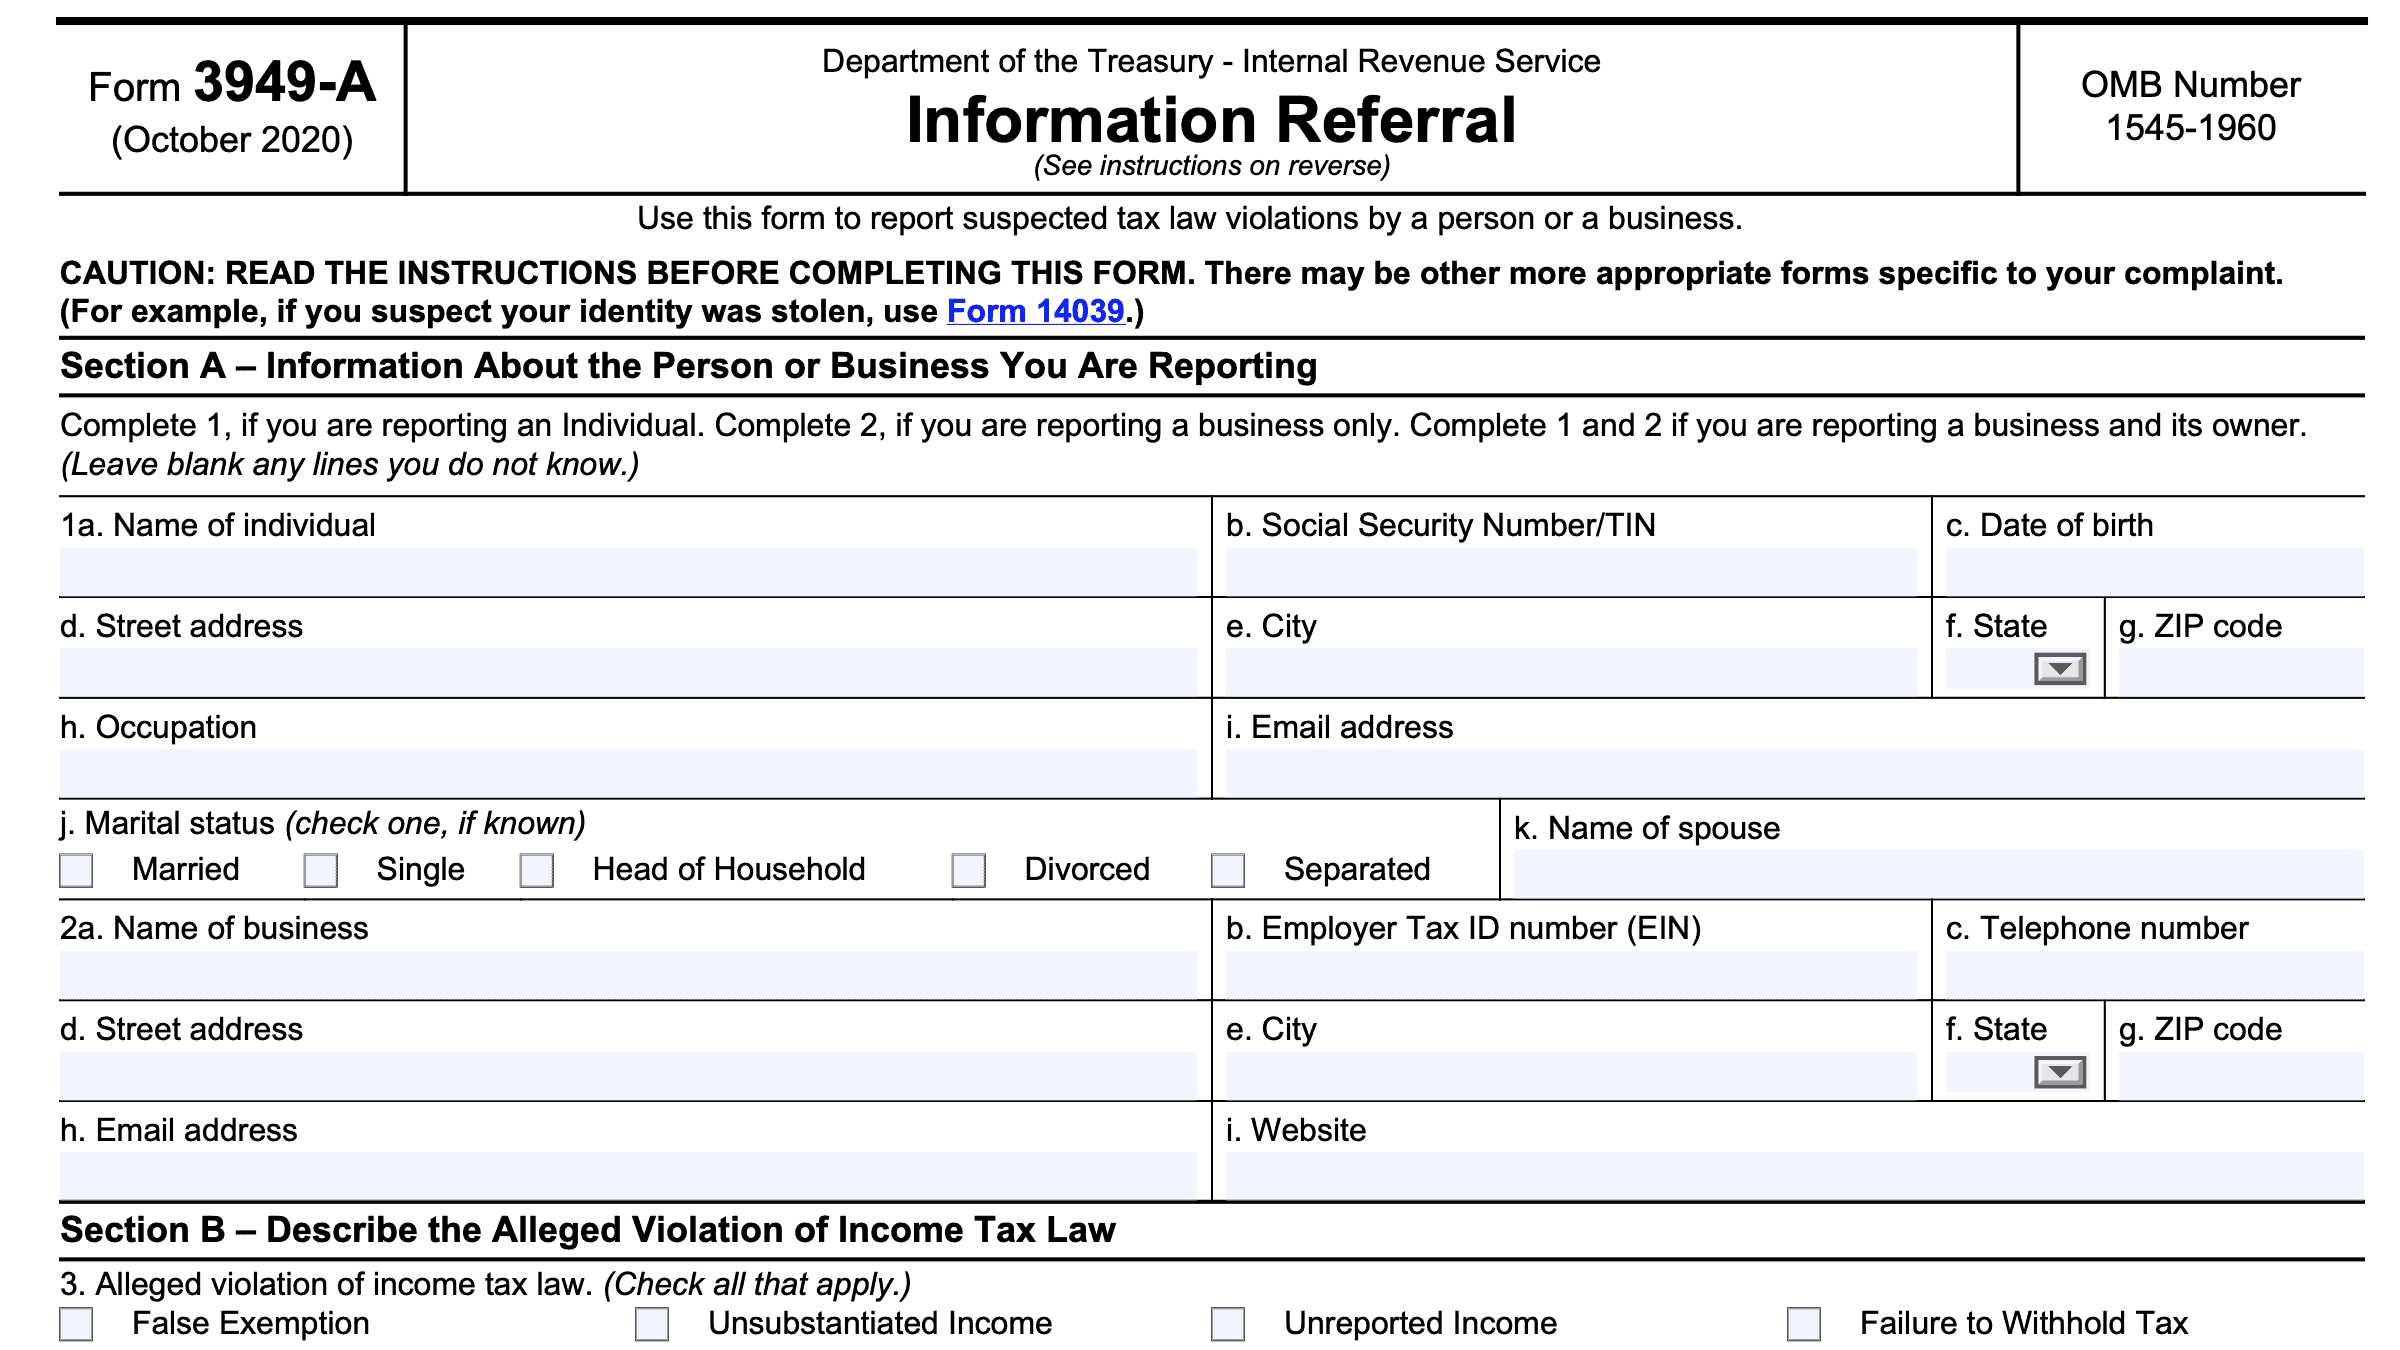 irs form 3949-A, information referral, is used to report suspected tax law violations by a person or business